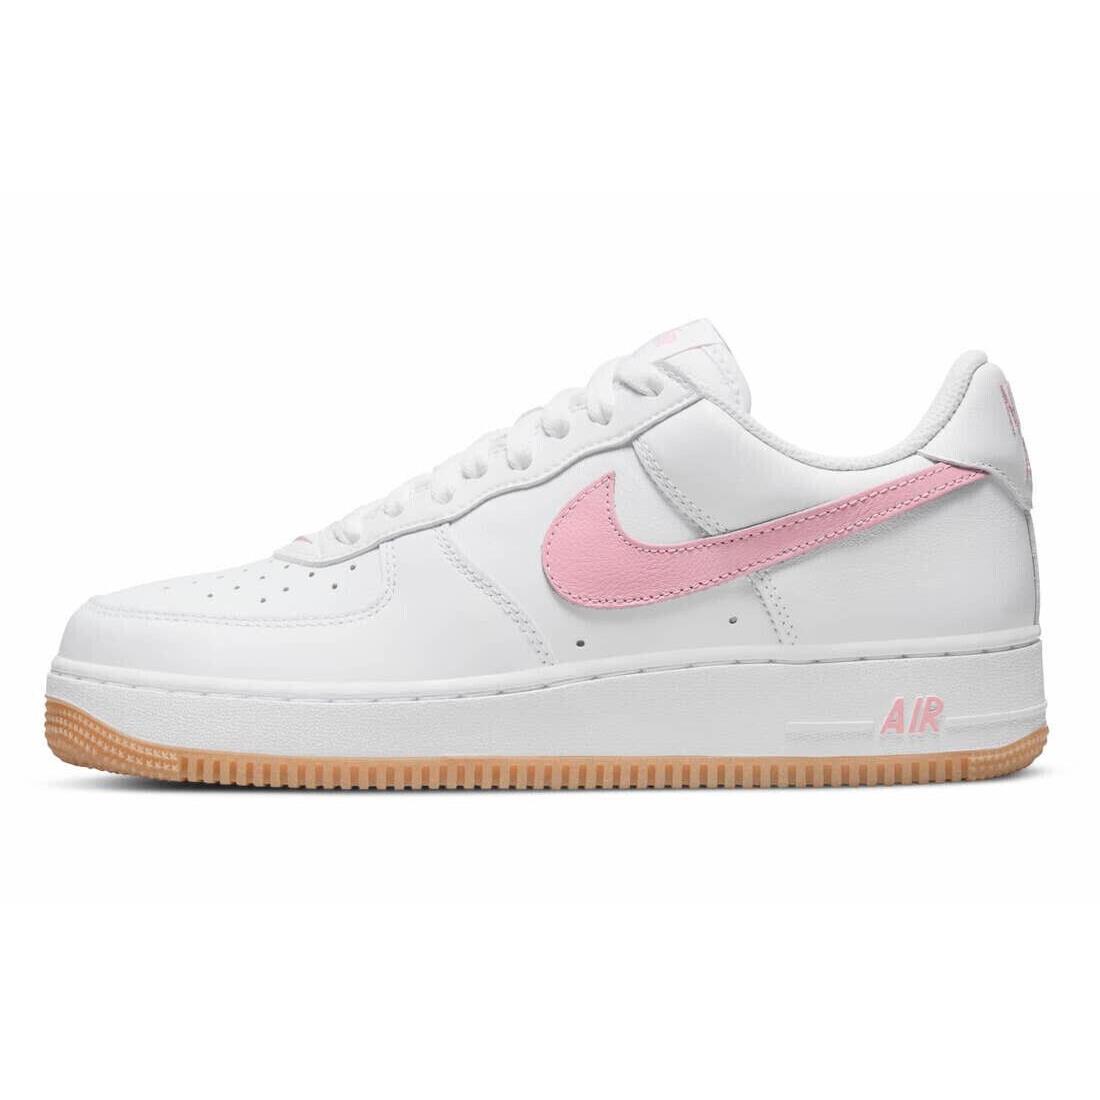 Nike Air Force 1 Low Retro Valentines Day Size 11 Mens White Pink DM0576 101